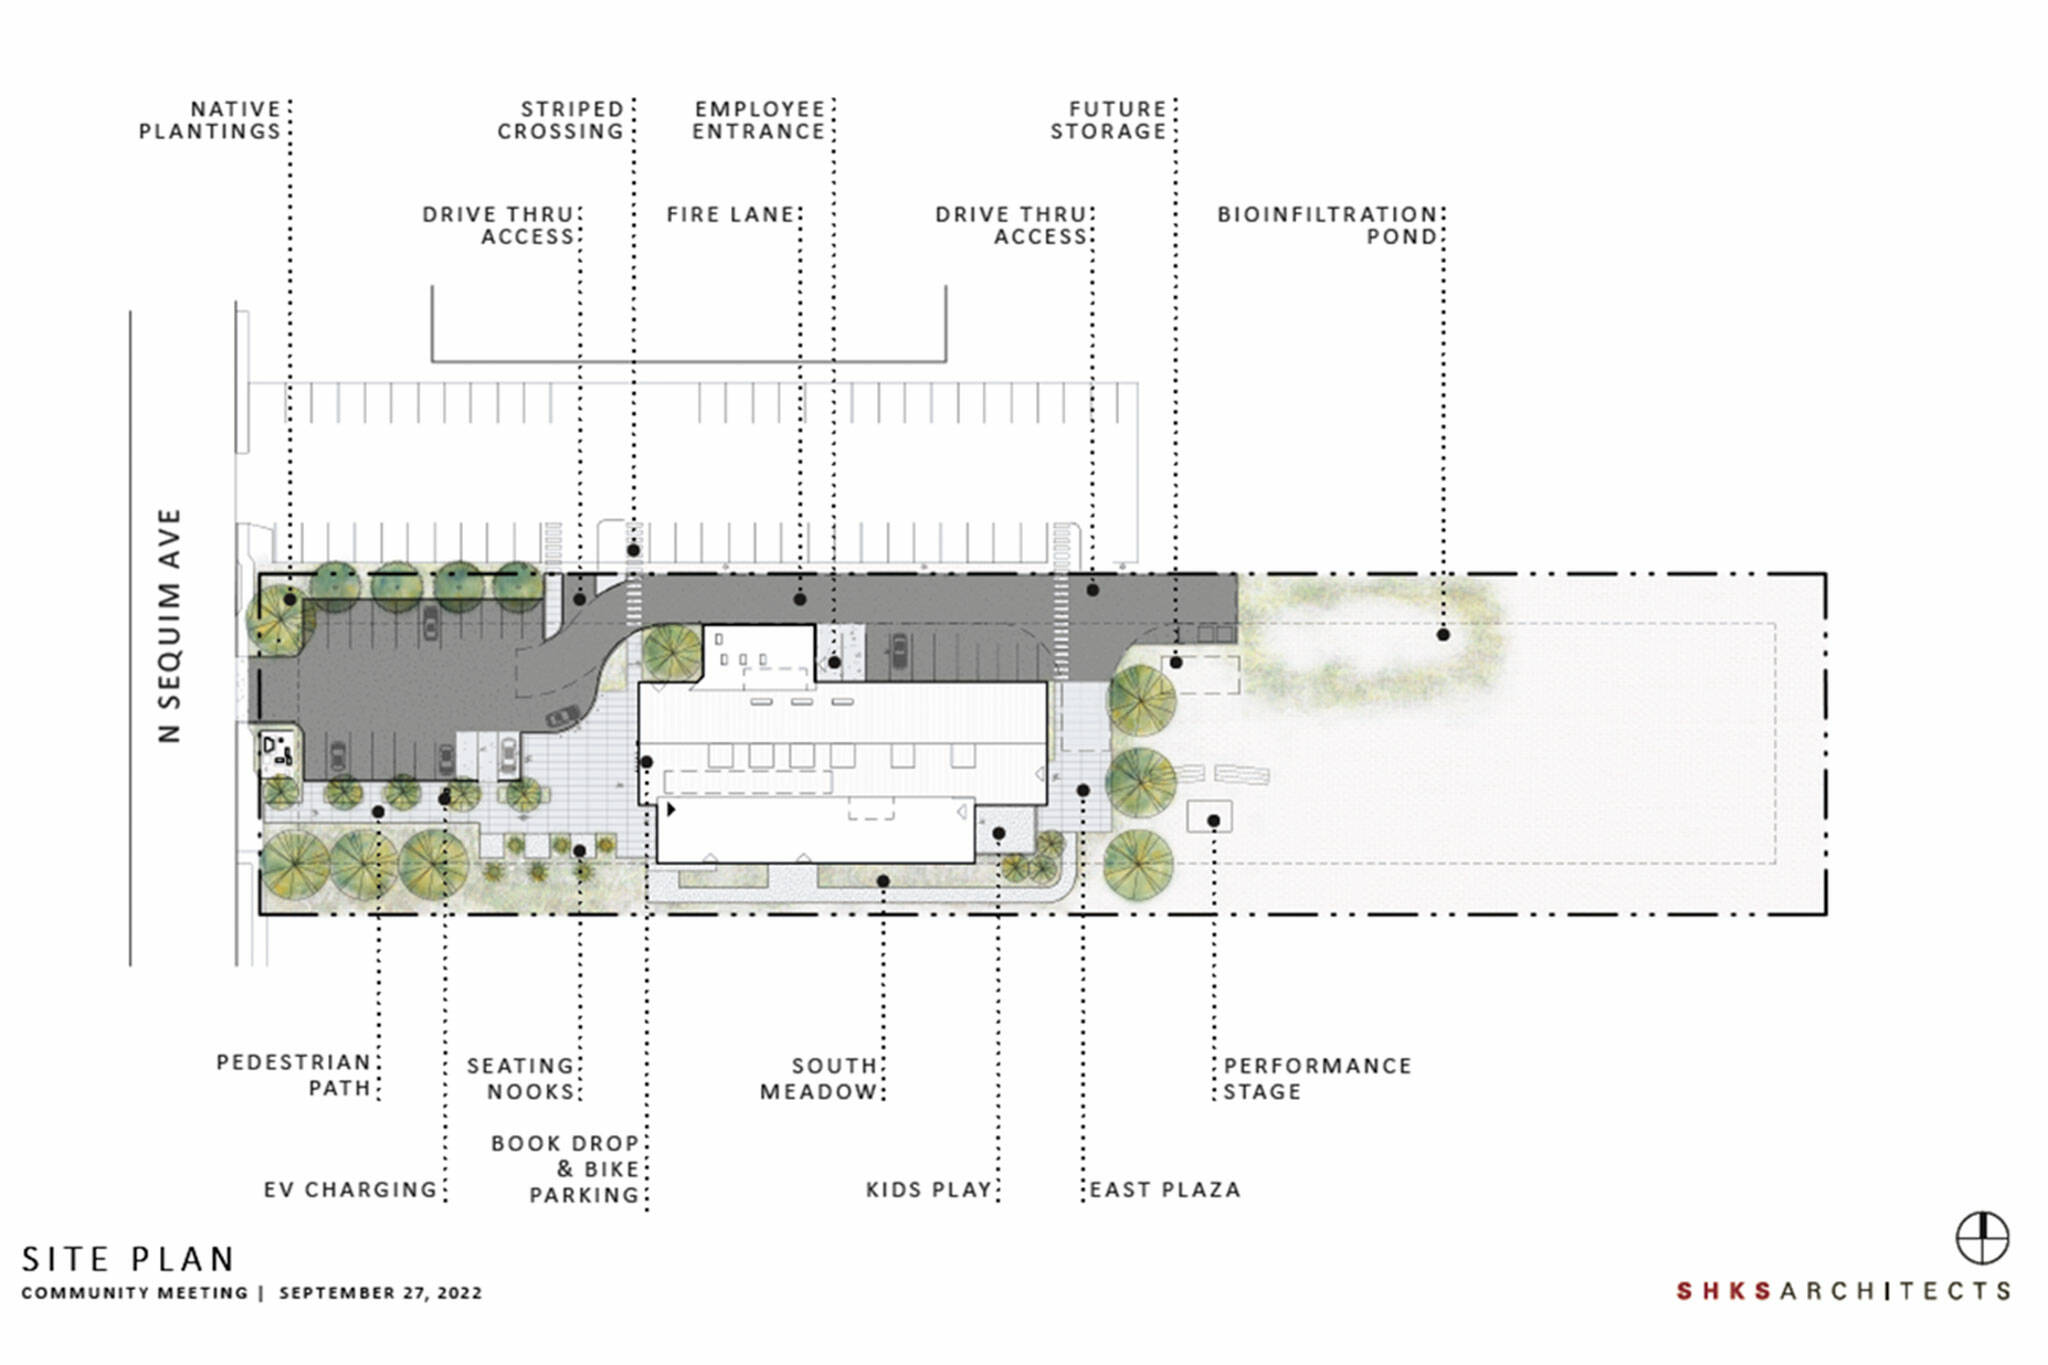 Image courtesy SHKS Architects/ Outside the remodeled Sequim Library, a proposed design includes a south side pedestrian path, seating, and bike parking while vehicle parking would be along the north side.